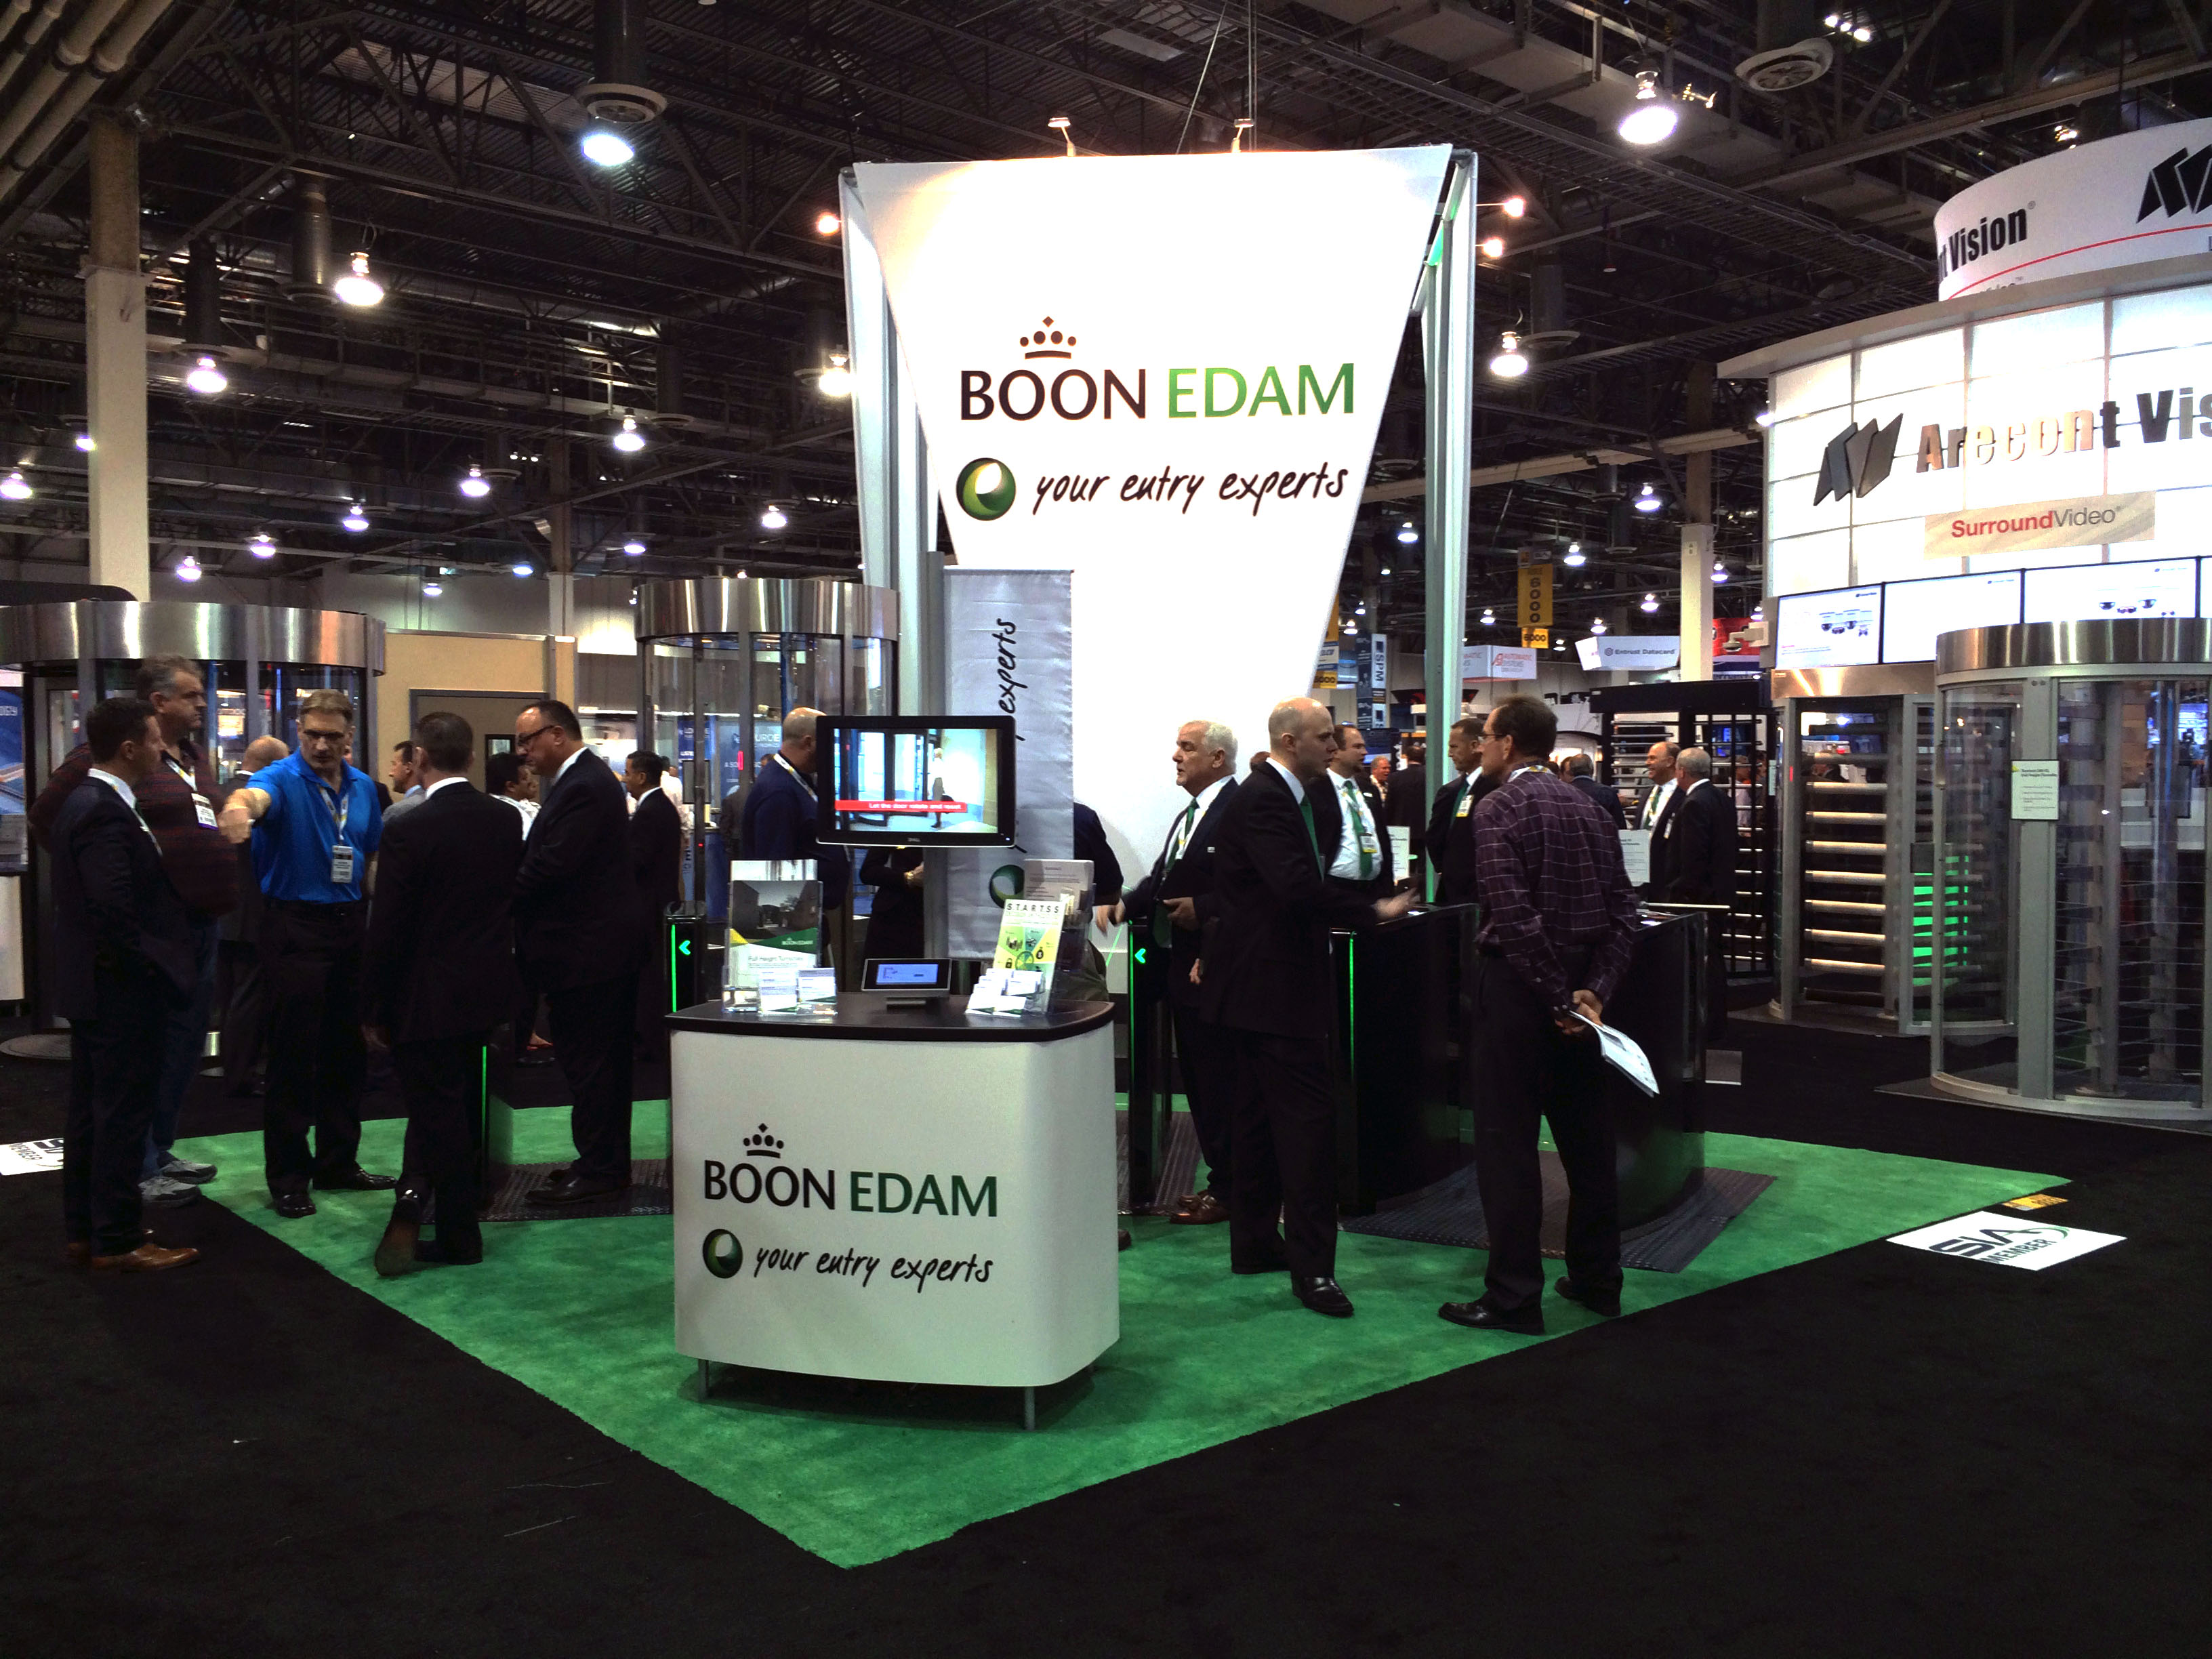 The Boon Edam booth always sees a lot of tradeshow action!